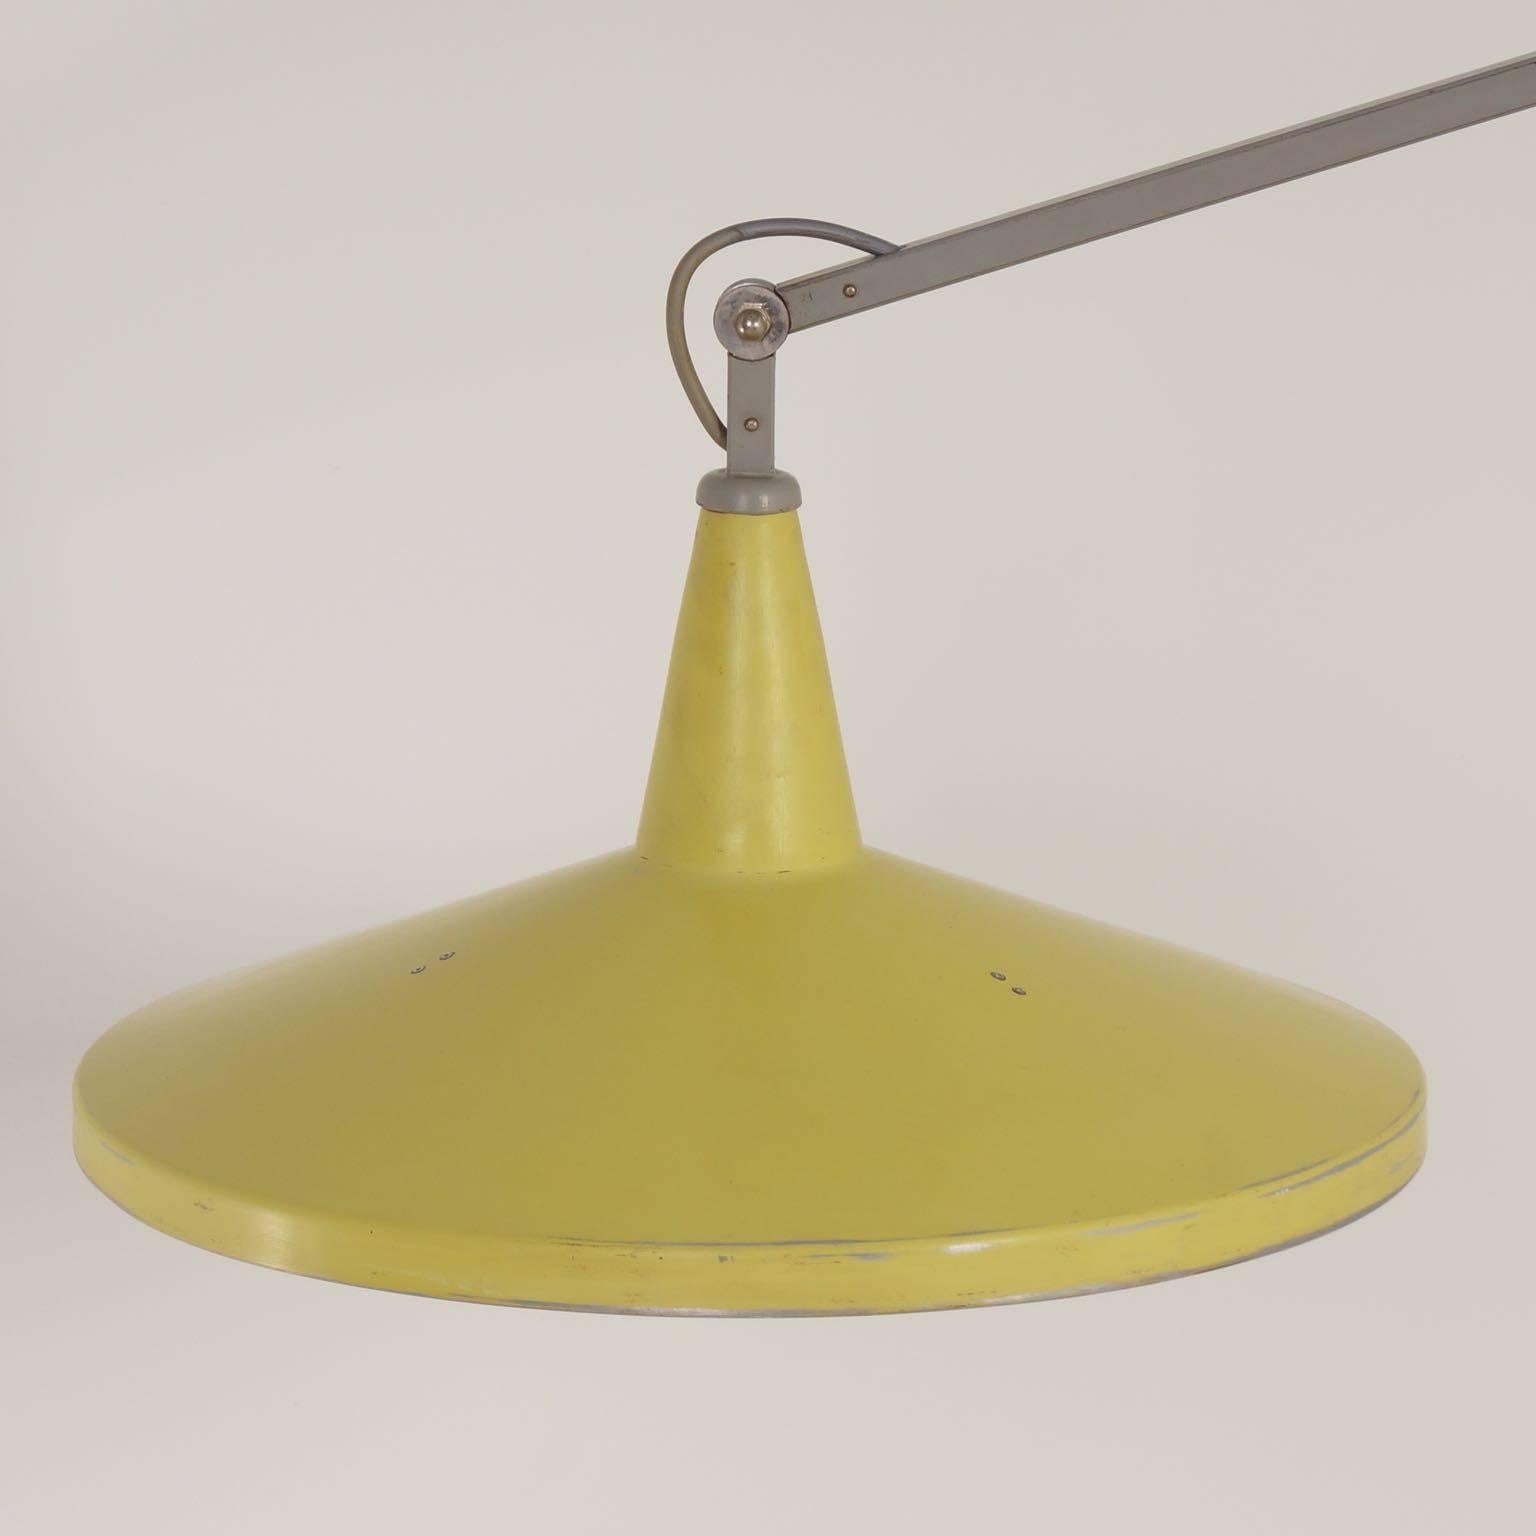 Painted Rare Yellow Panama Wall Lamp No. 4050 by W. Rietveld for Gispen, 1956 For Sale